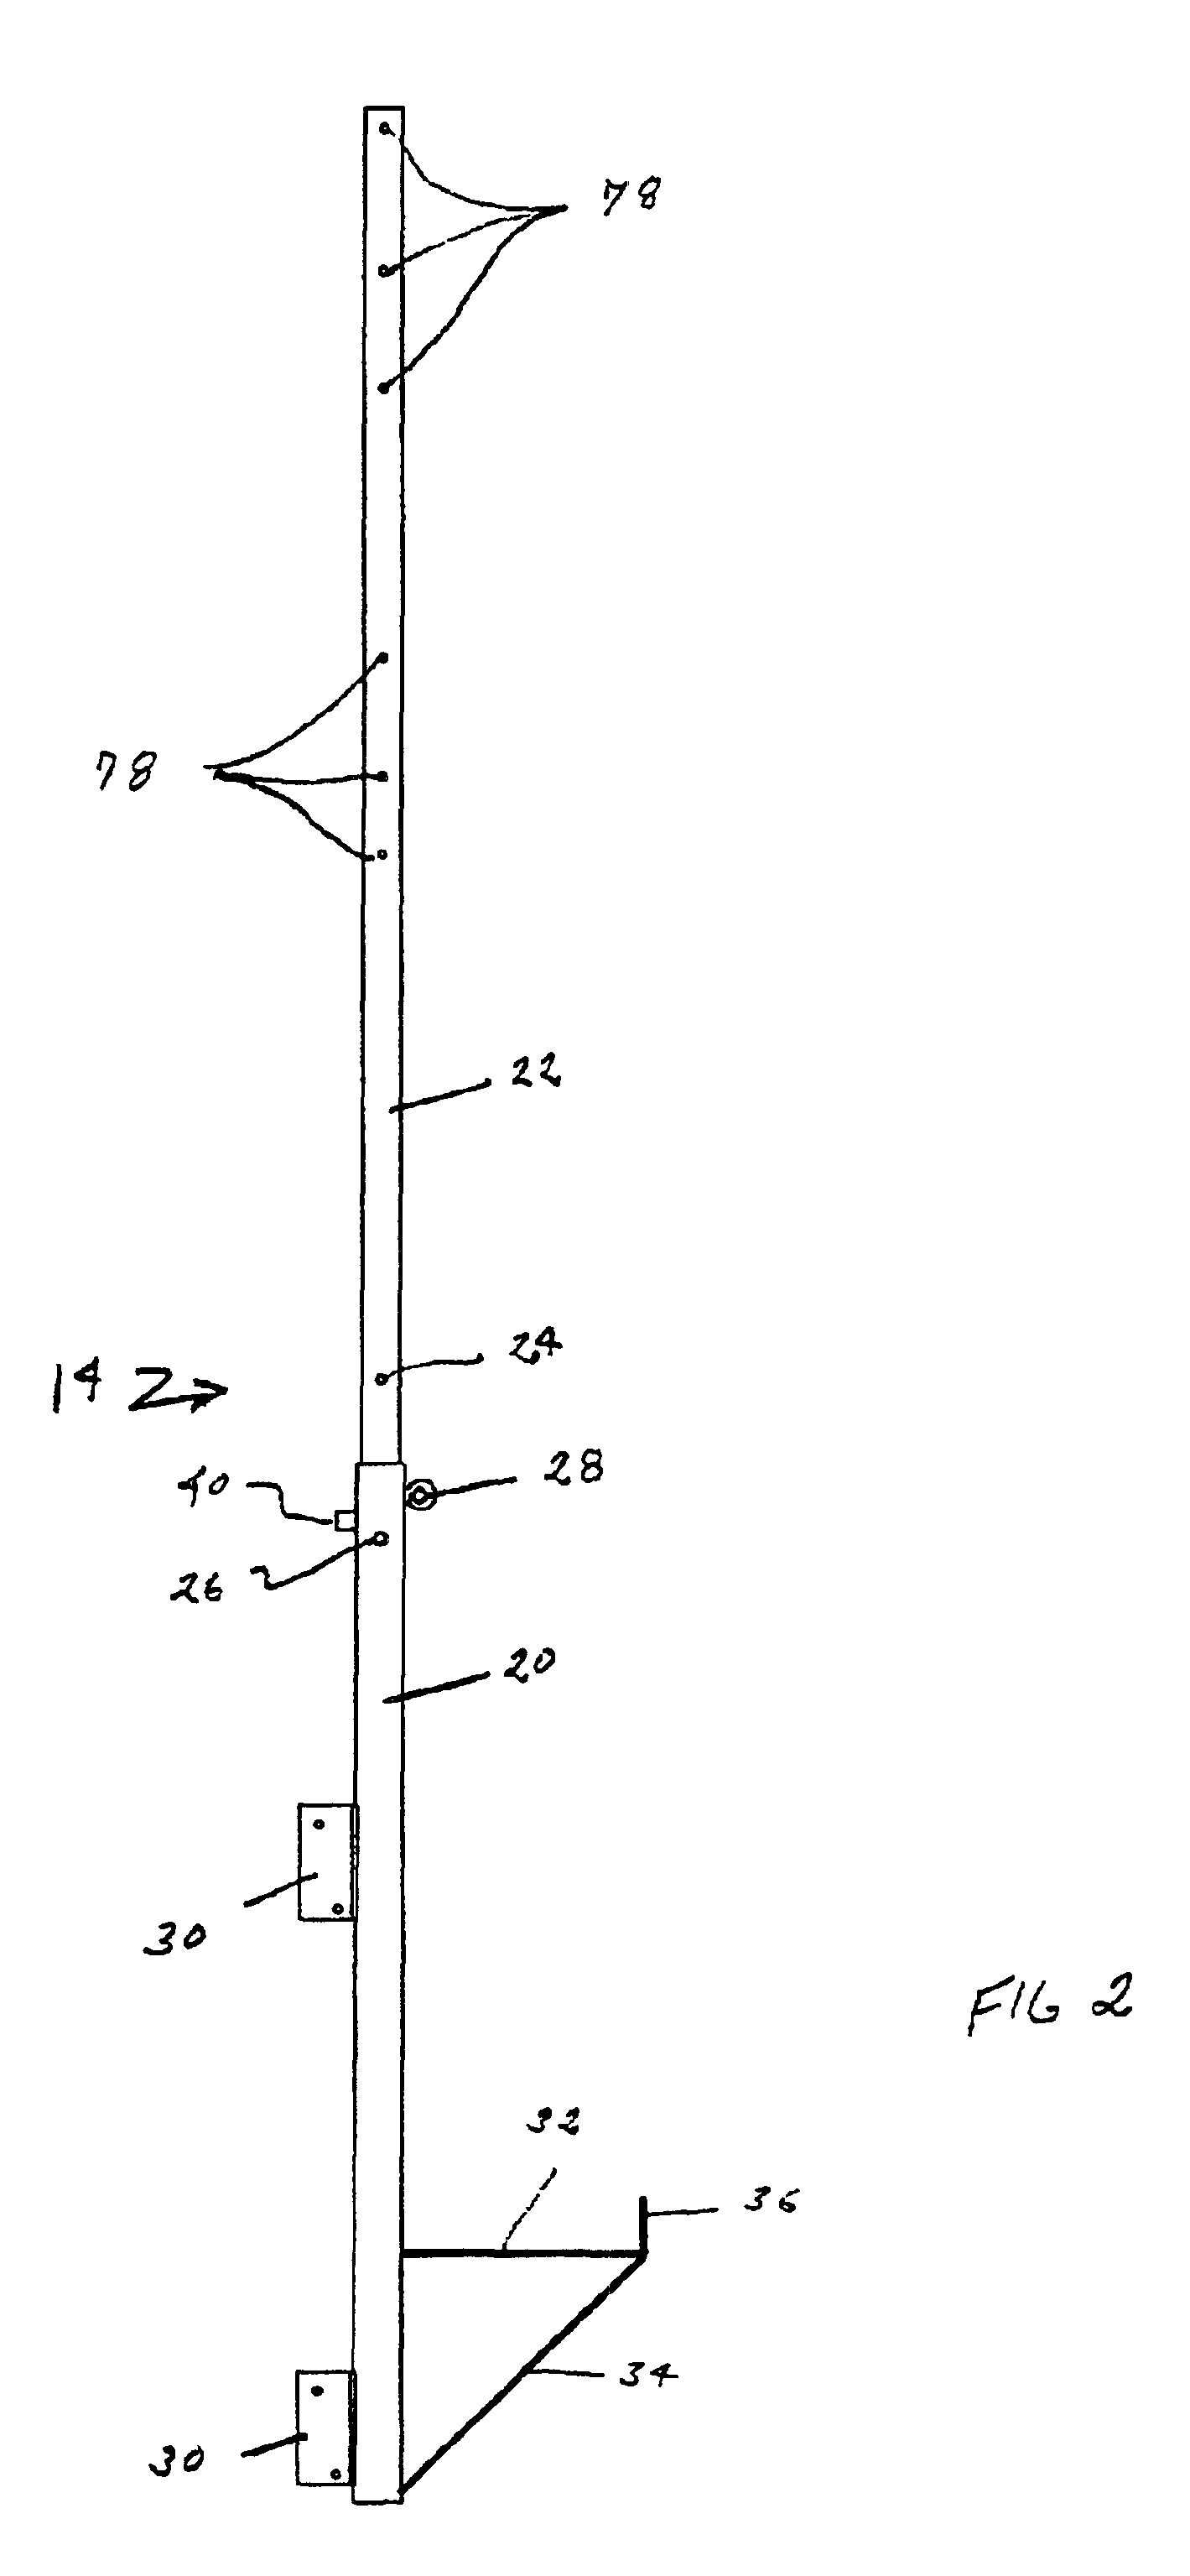 Rooftop fall arrester with working platform